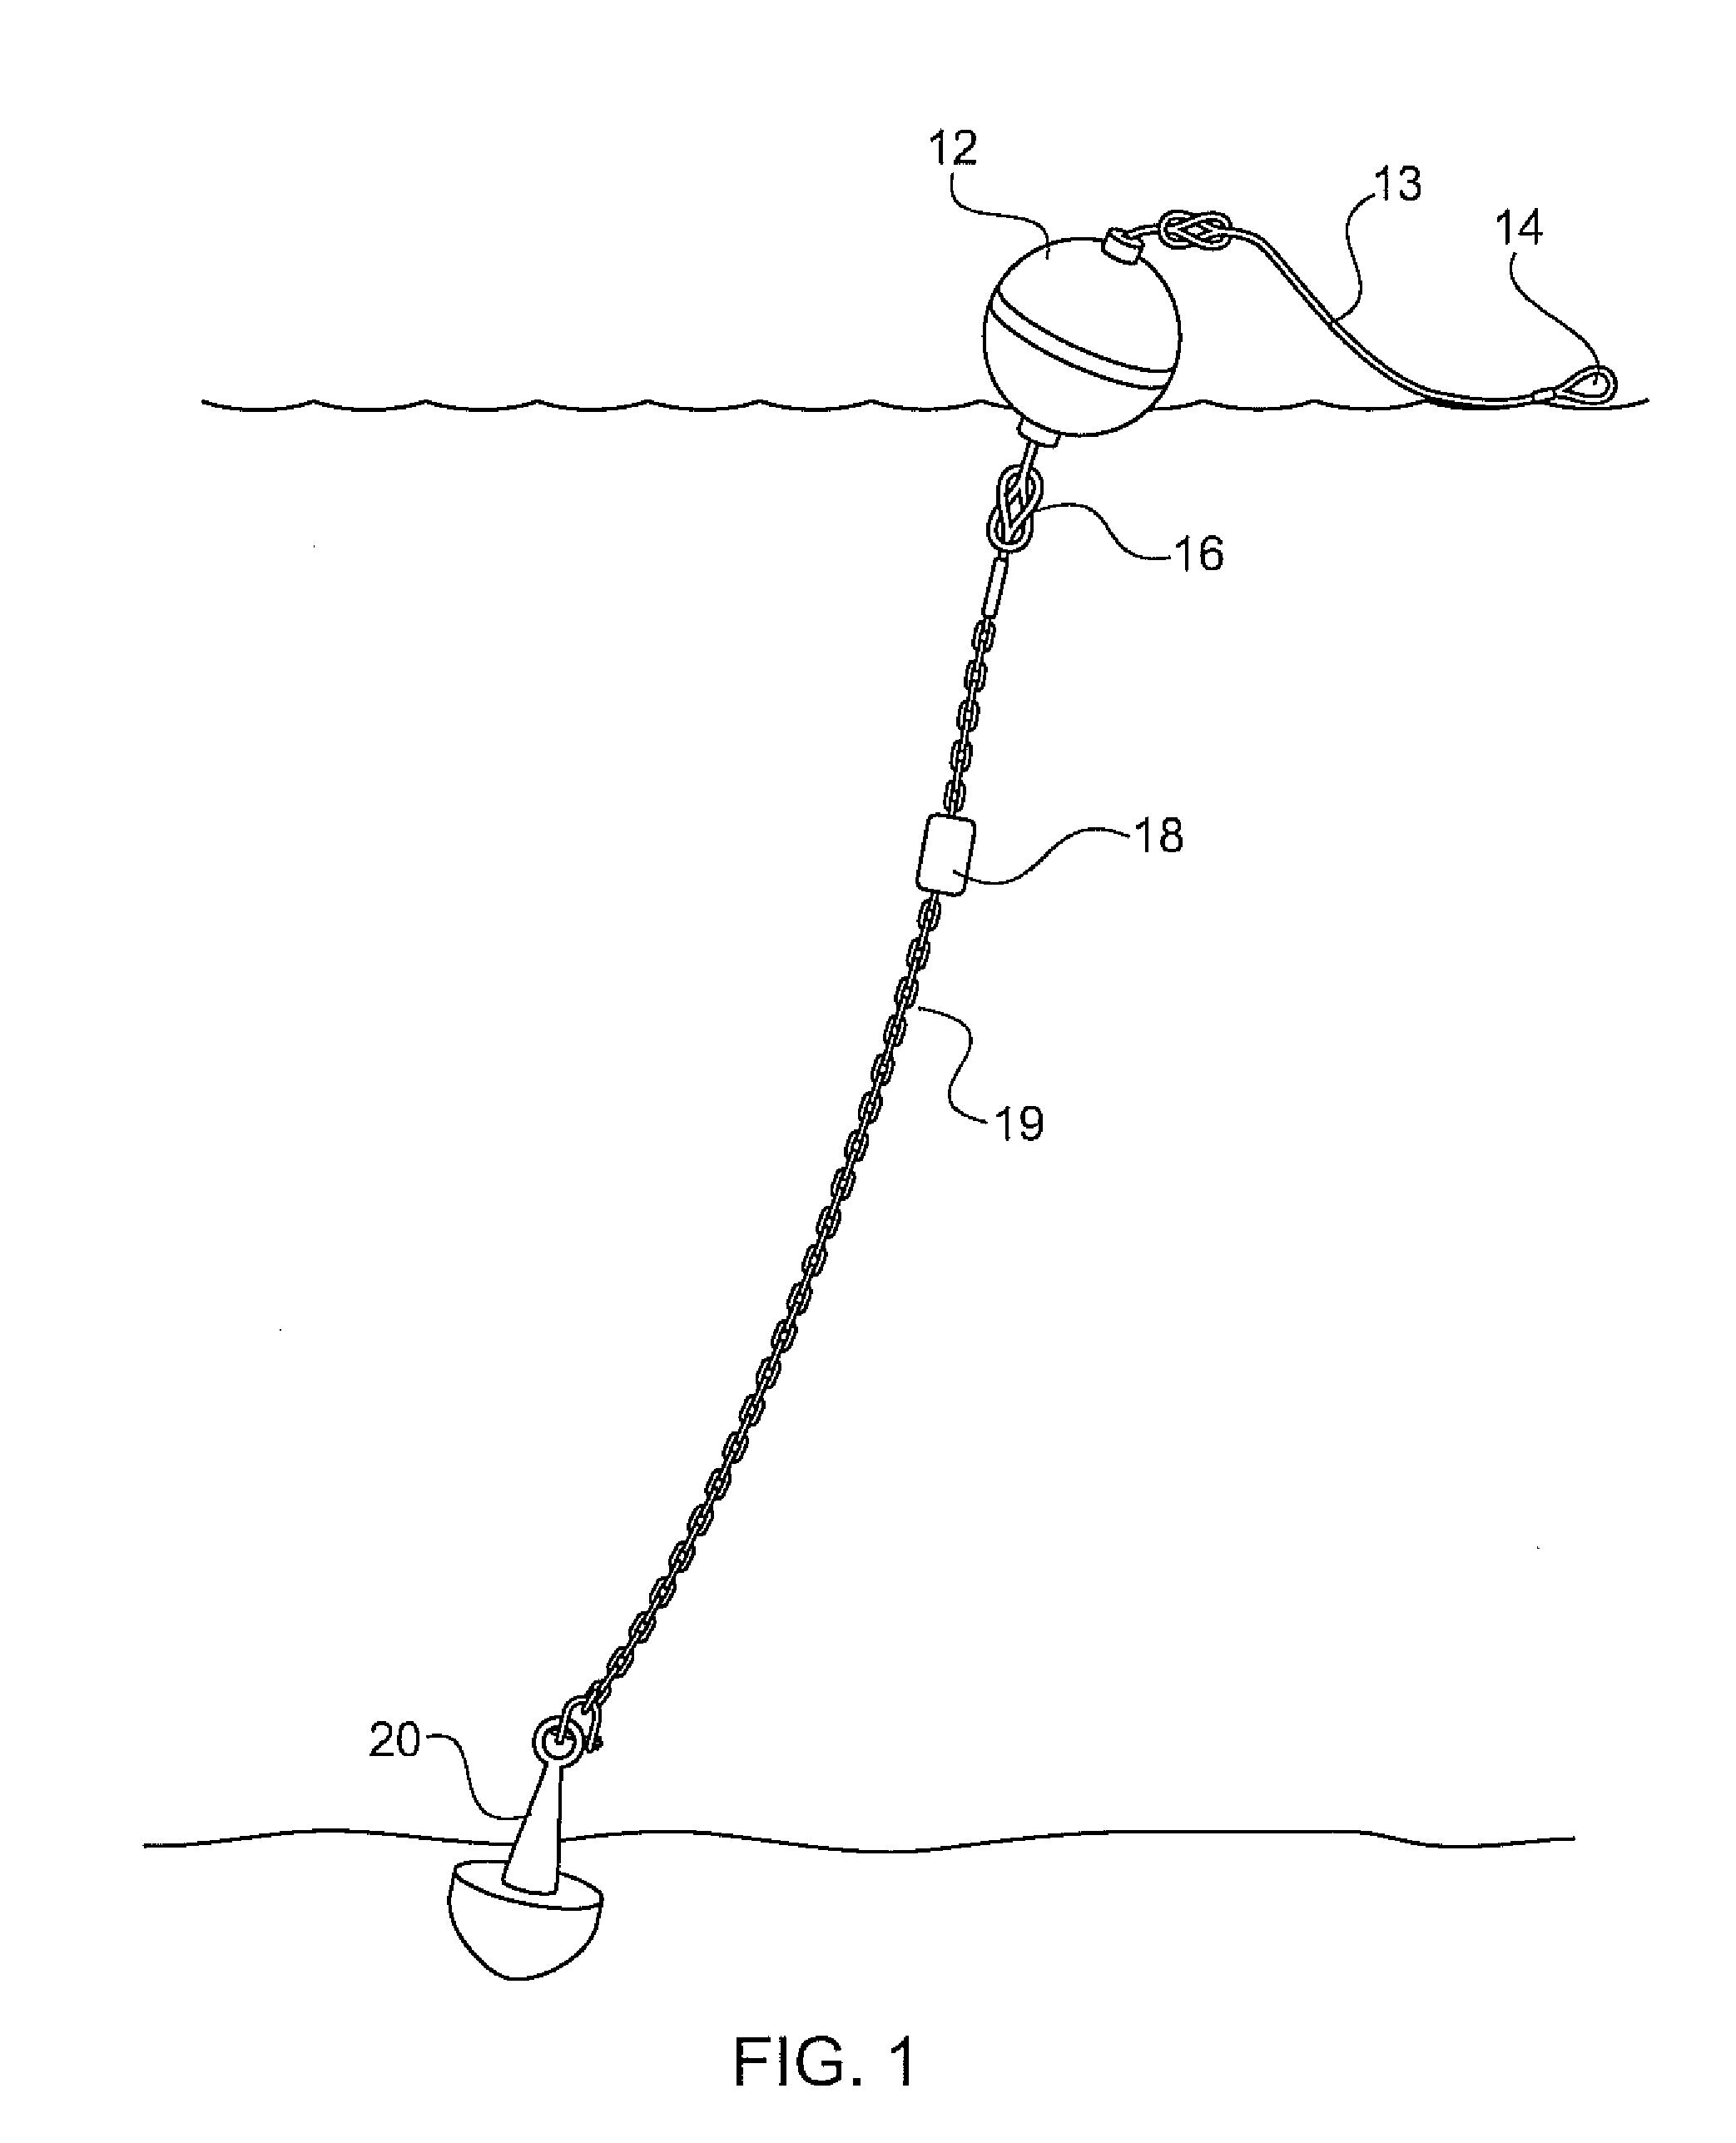 Apparatus for locating one mooring in a field of moorings